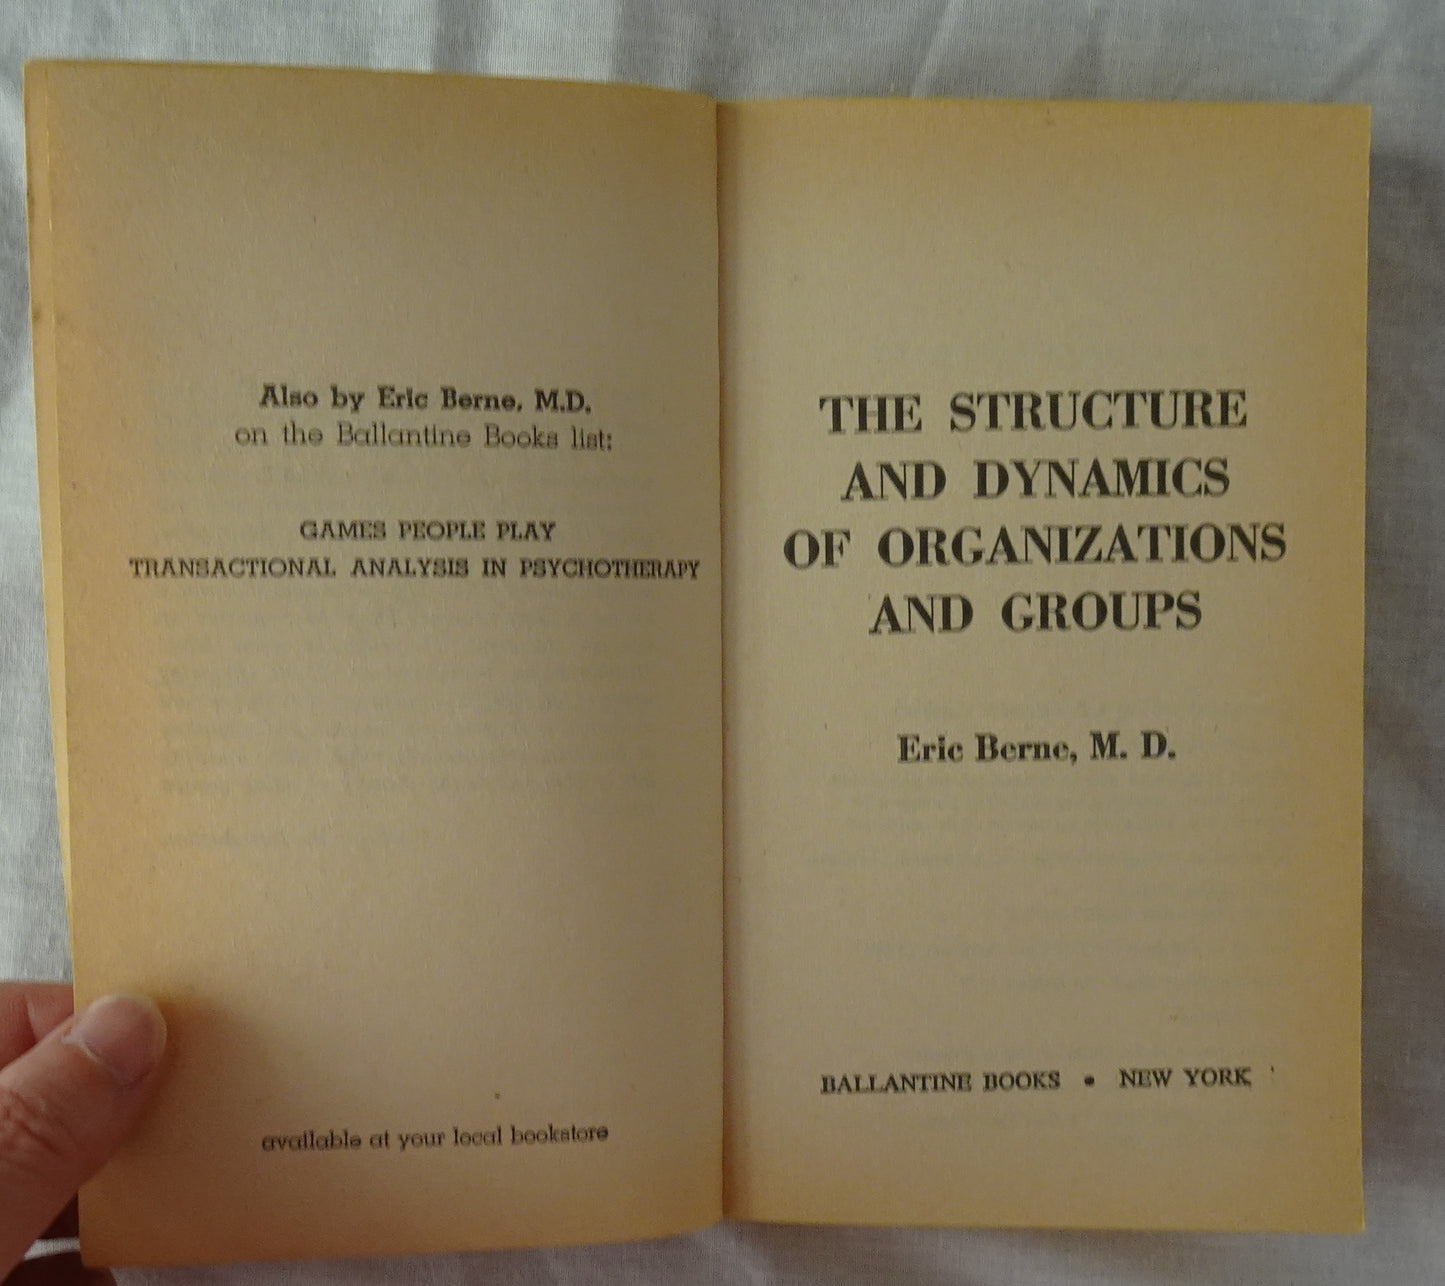 The Structure and Dynamics of Organizations and Groups by Eric Berne